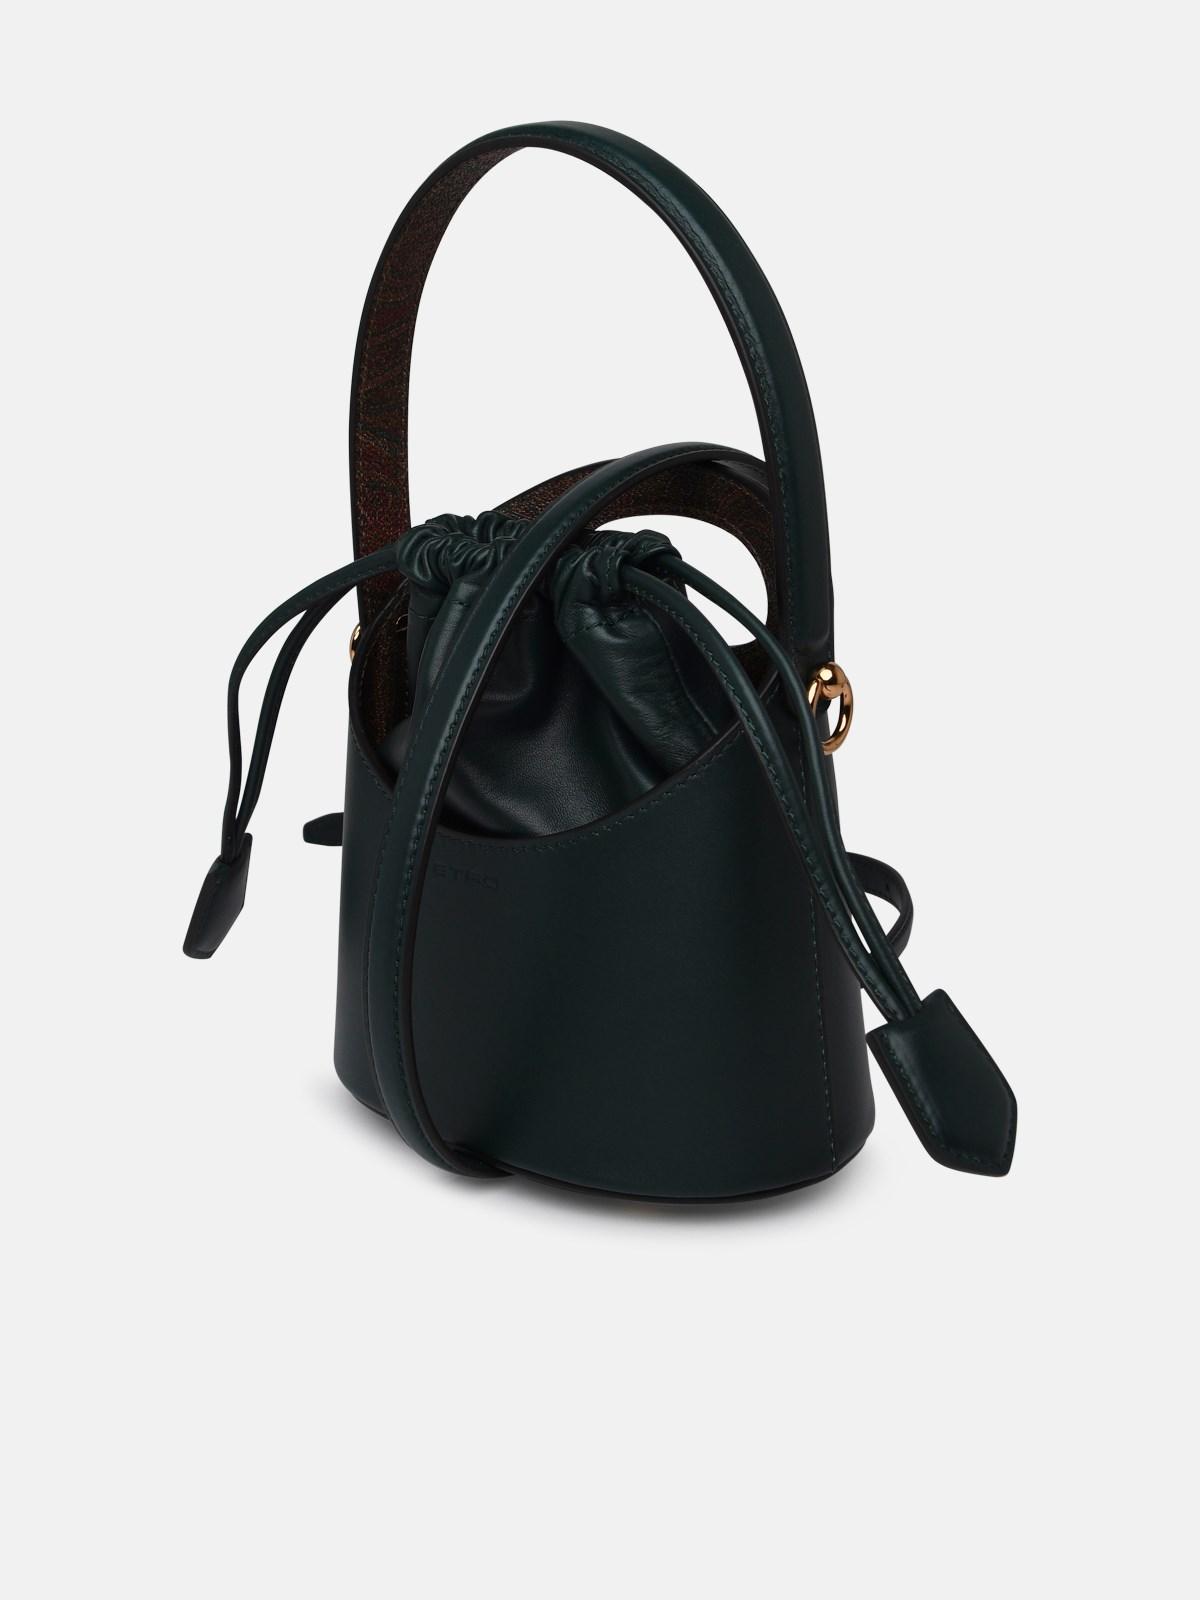 Etro Small 'saturno' Green Leather Bag in Black | Lyst